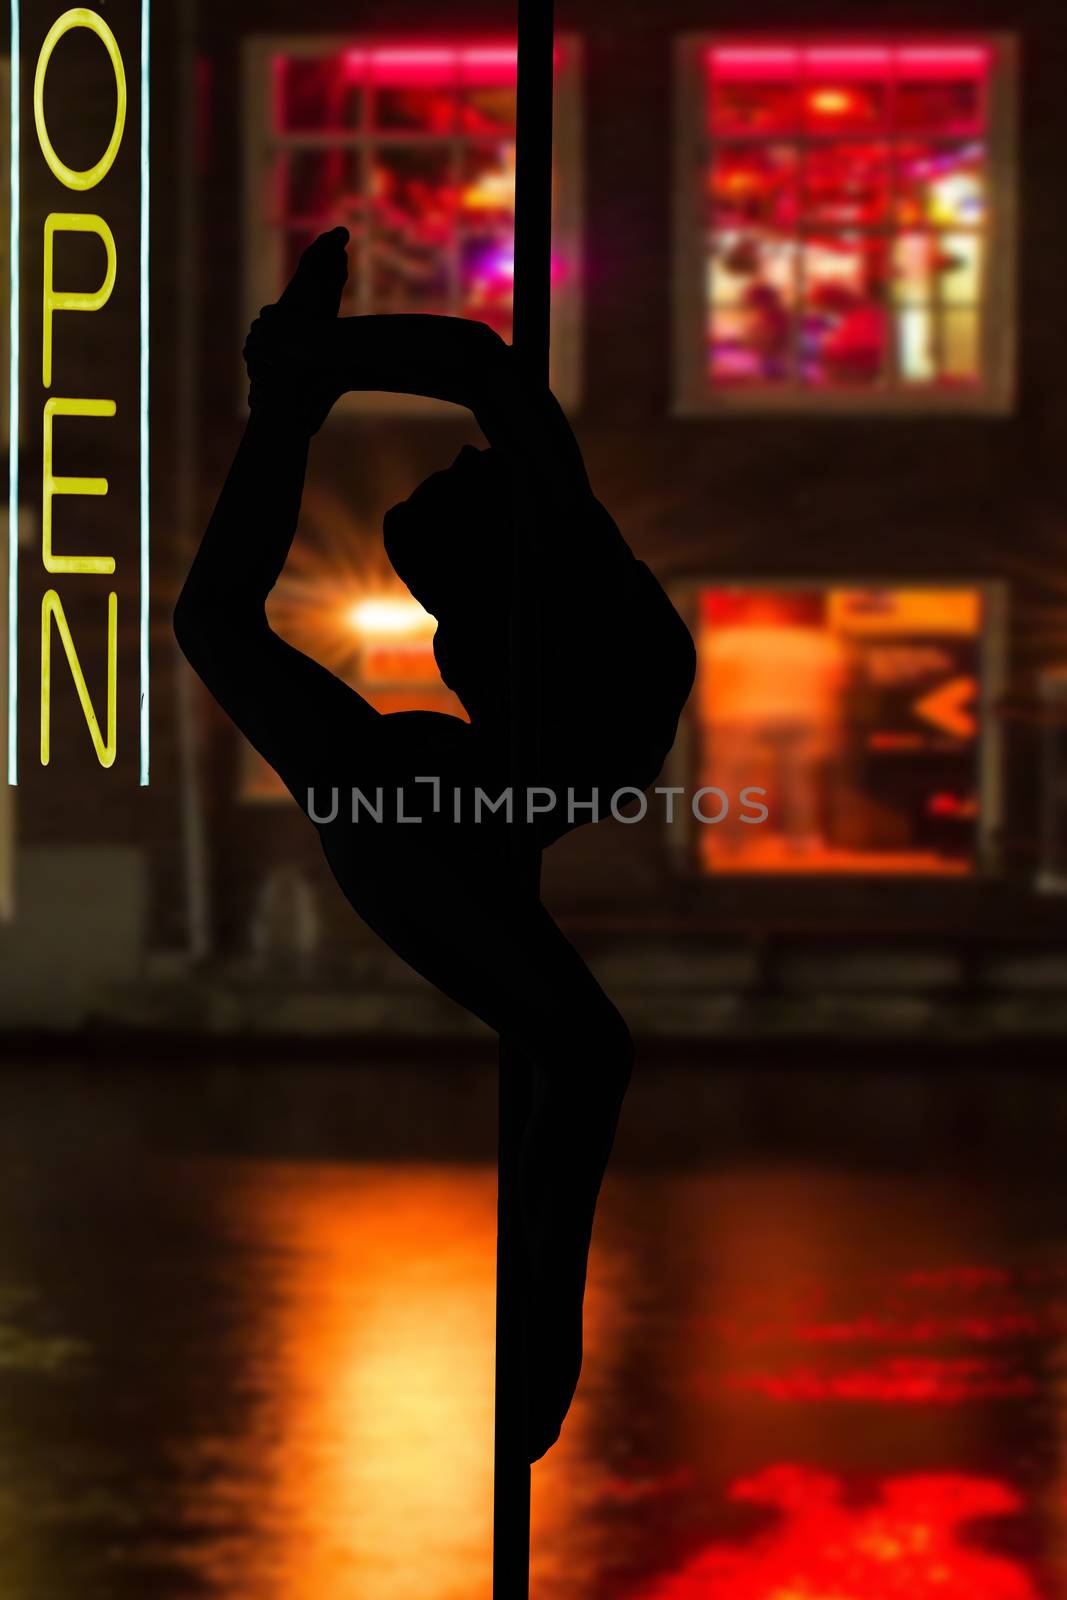 Dancing elegant young girl hanging in a dance pole in front of windows with red light and open sign by charlottebleijenberg